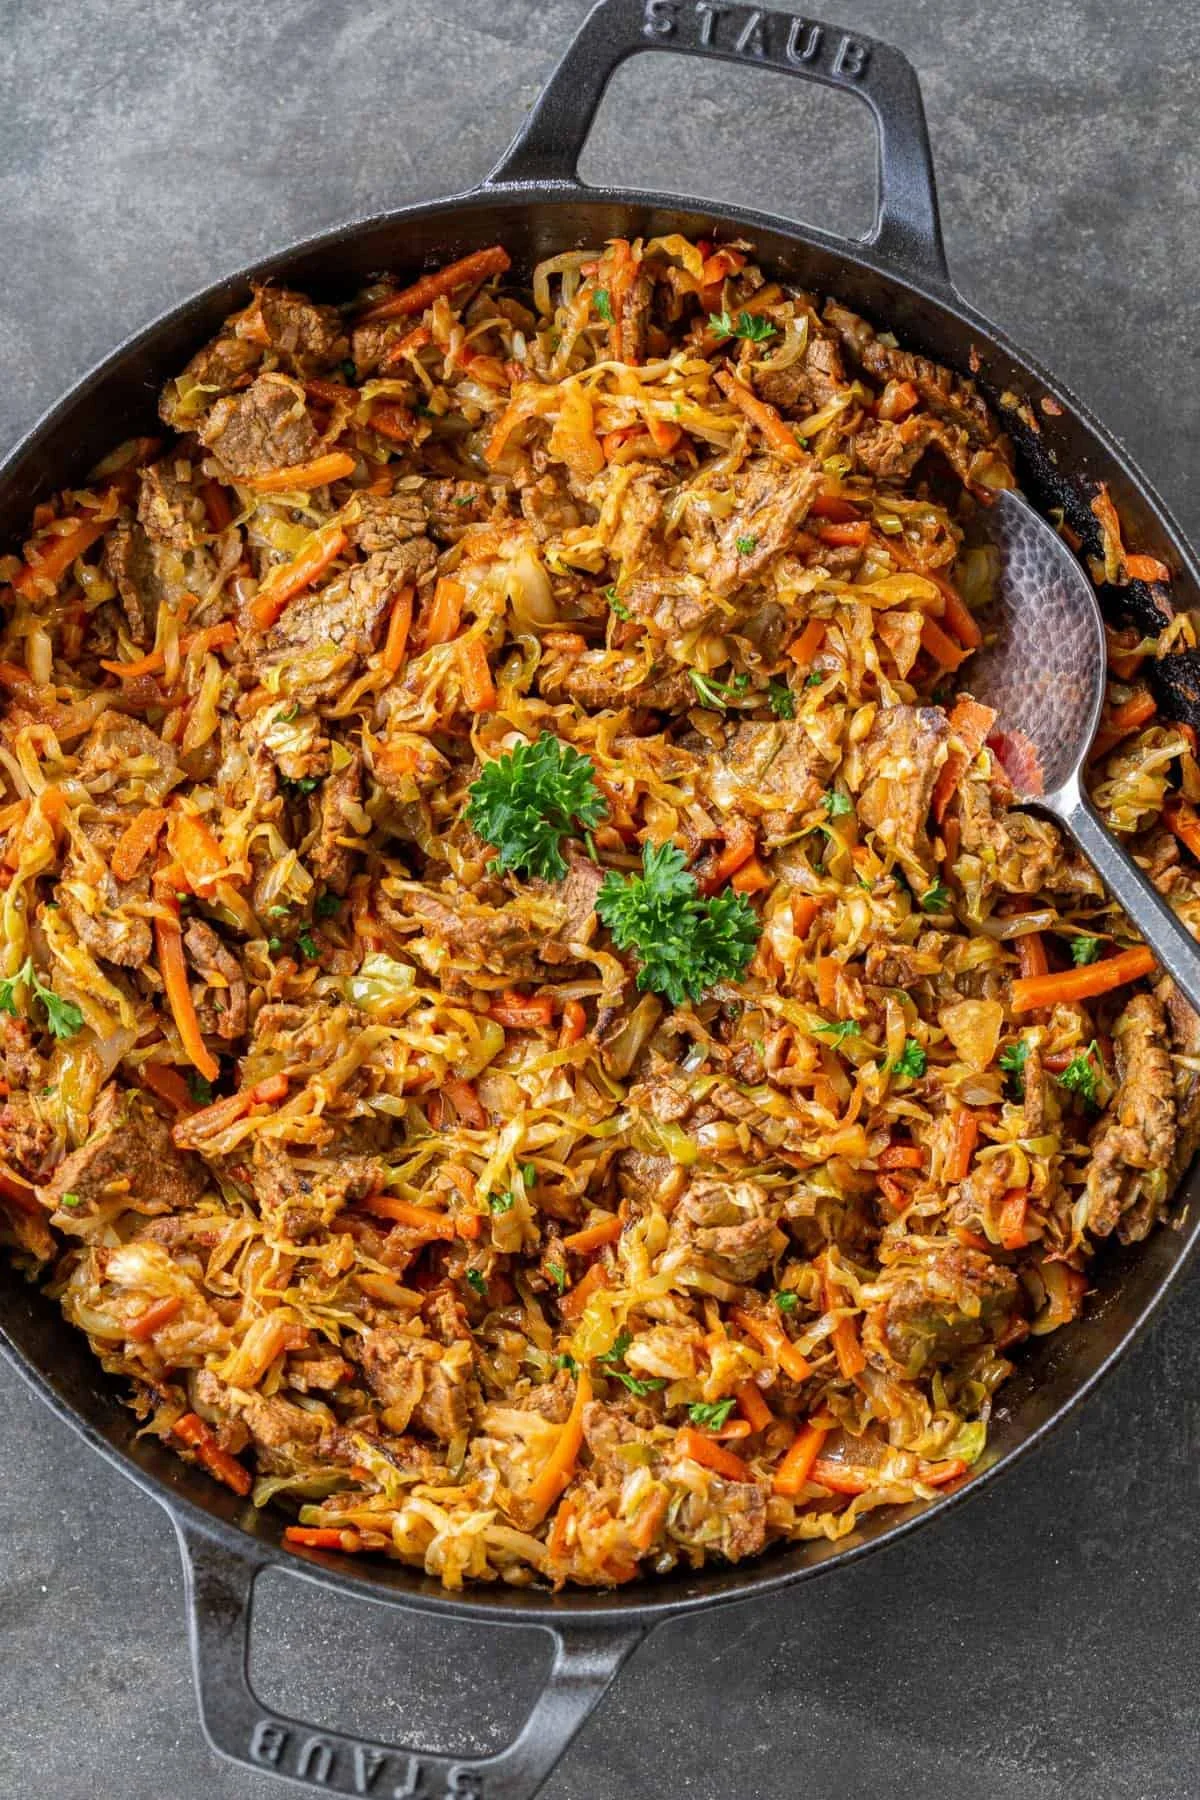 Braised Cabbage with Beef